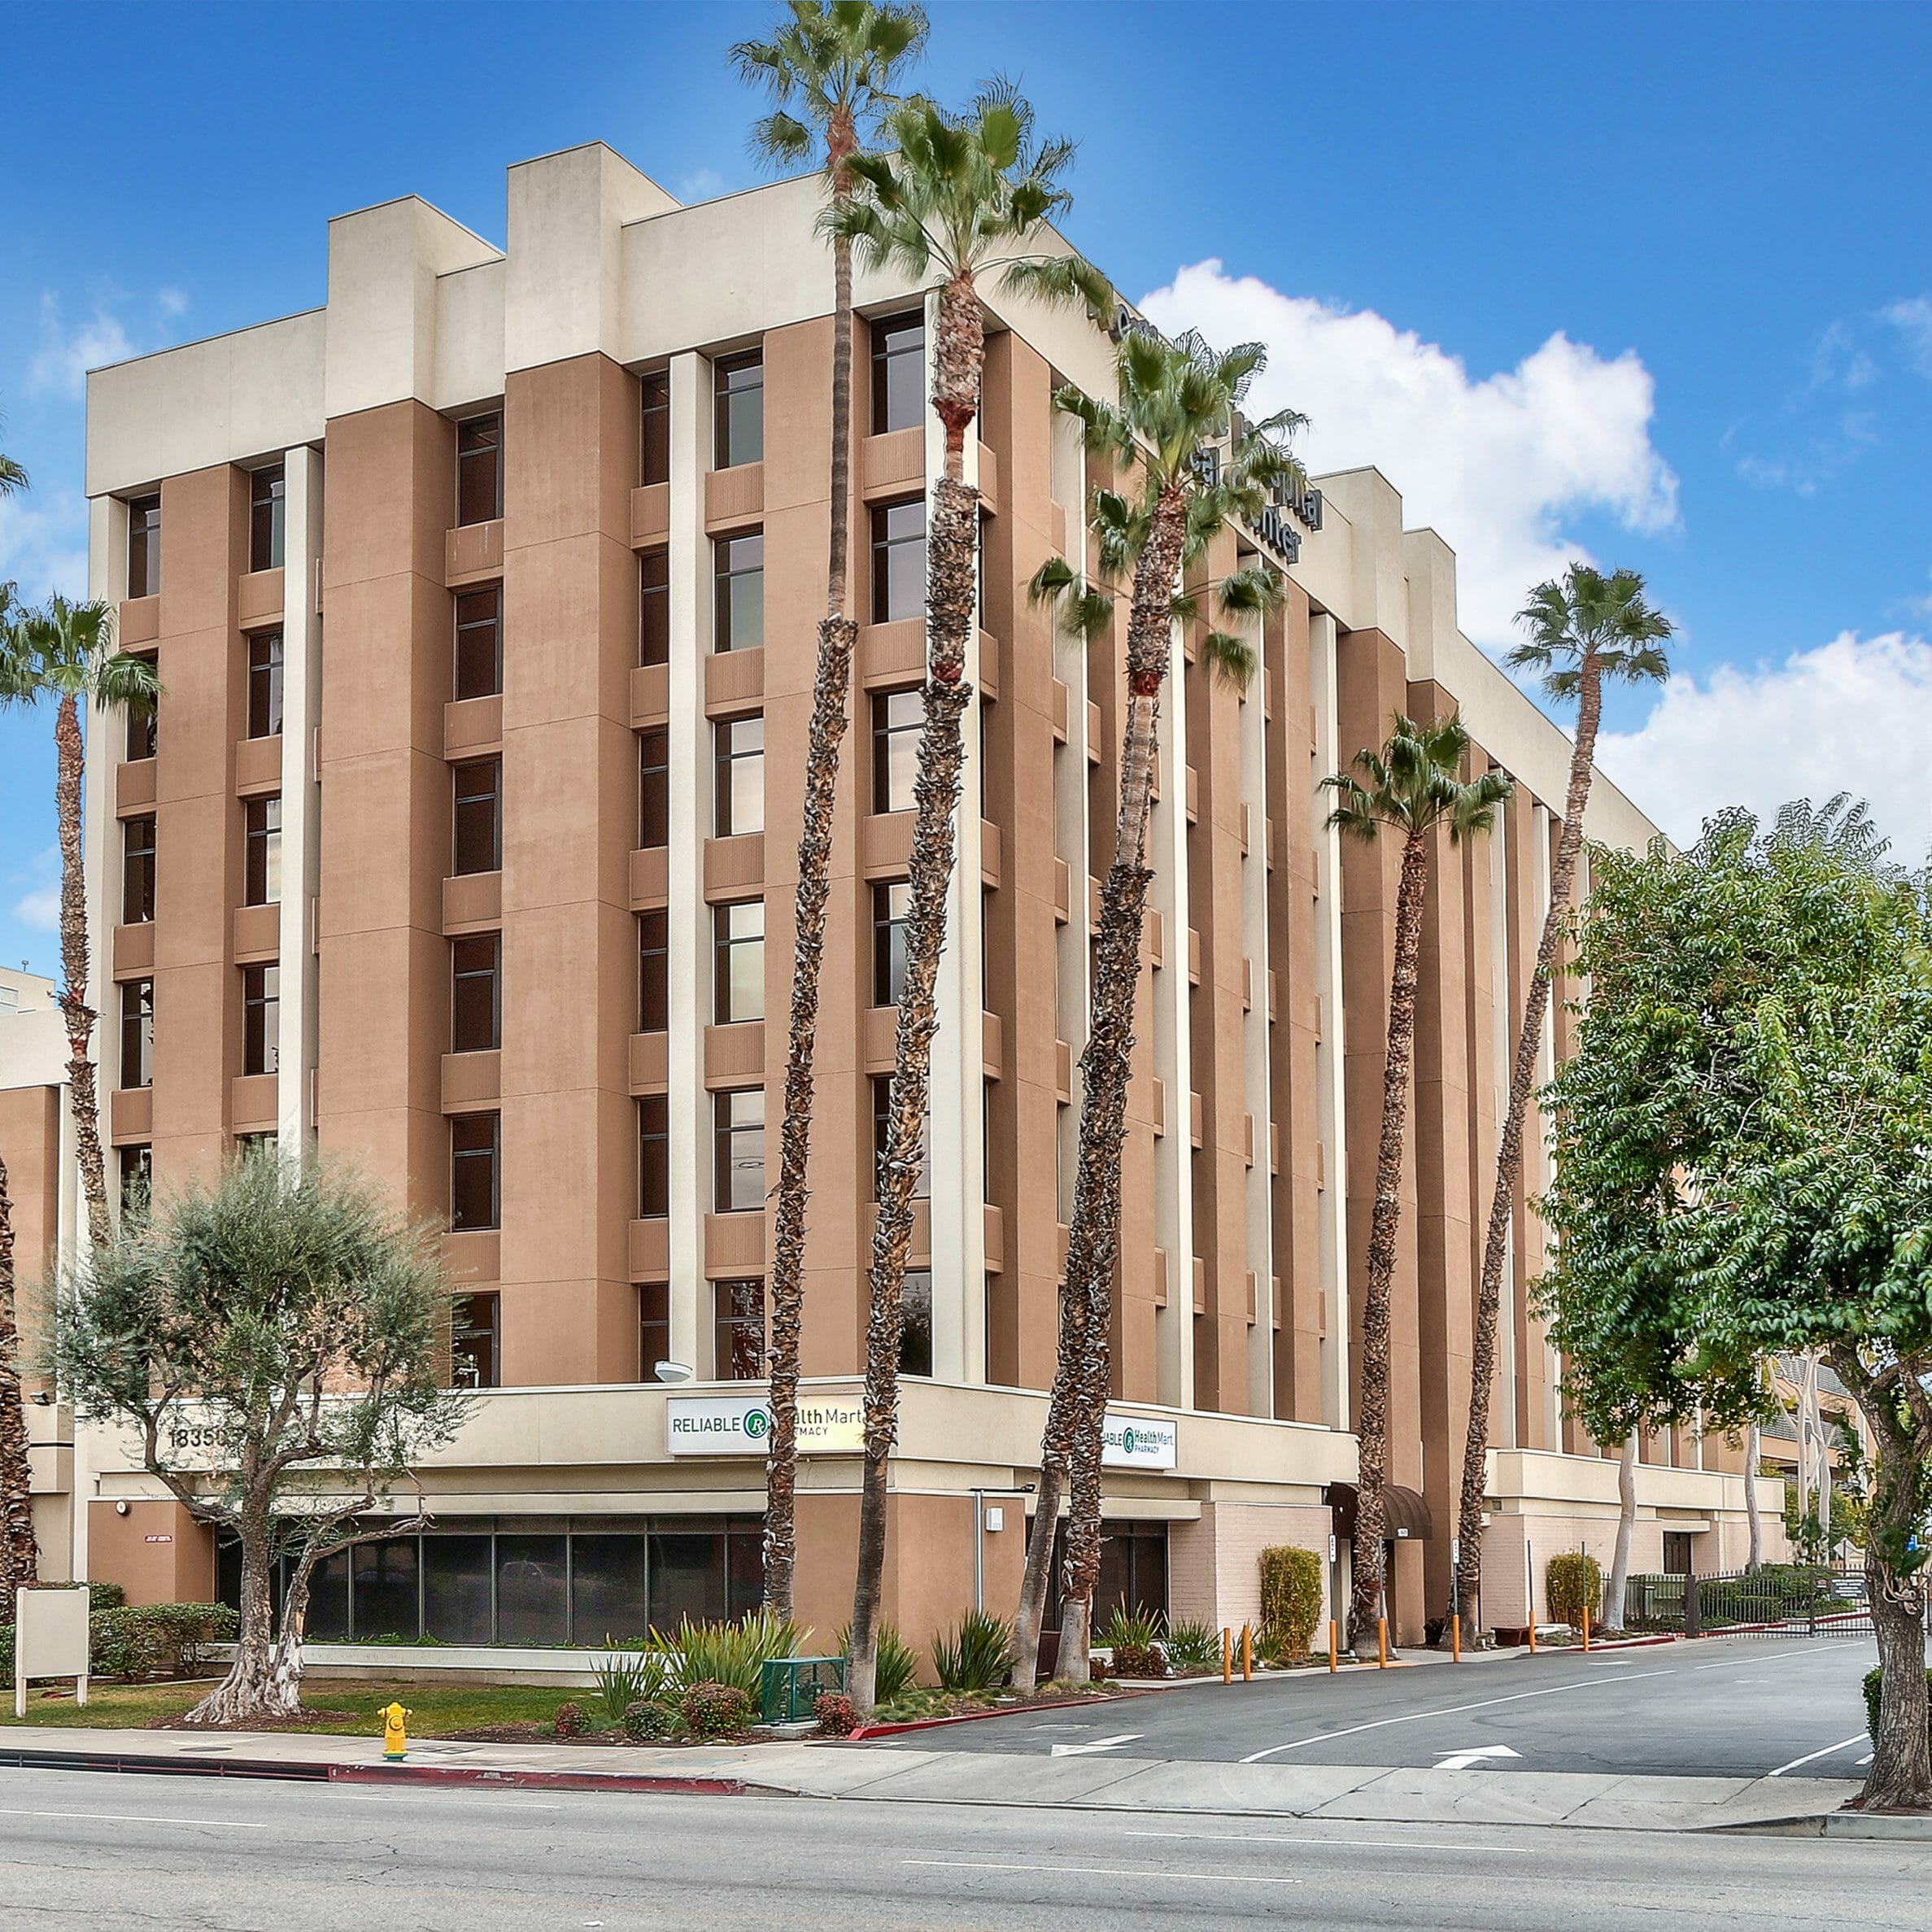 Exterior street view of 7-story medical office building with a medium and light tan exterior with tall, tropical palms in front of the building